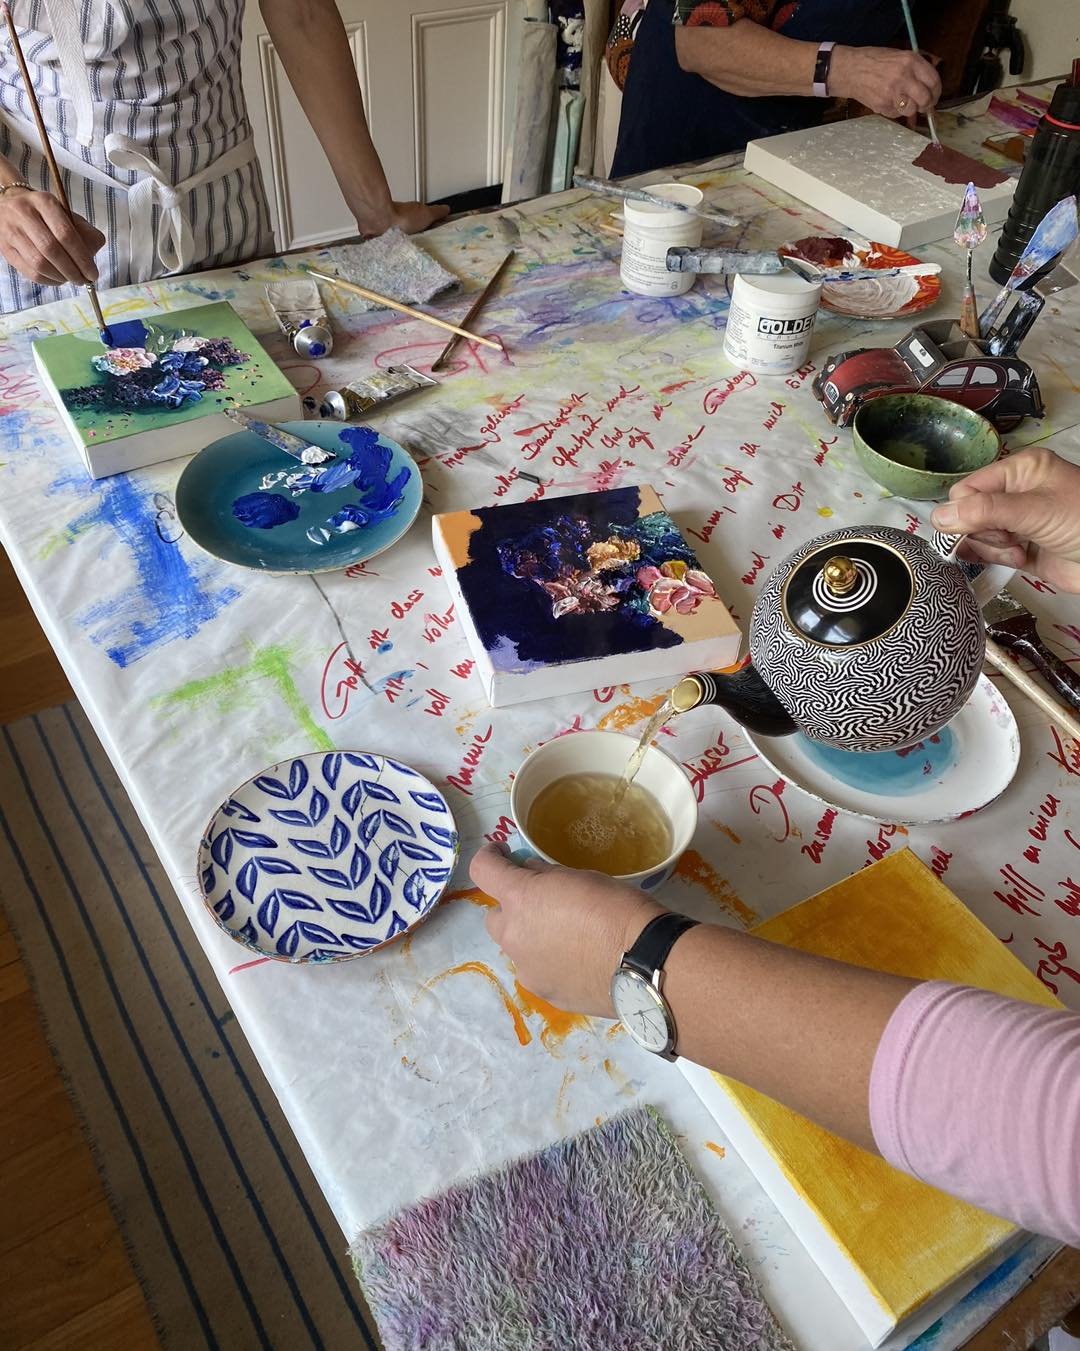 I wish you the best possible International Tea Day 🥰 and if you are in Balmain, you are always welcome in my studio for bottomless cups of tea. 

#tea #internationalteaday #bottomless #balmain #art #artstudios #welcome #balmainartist #acolourfullife